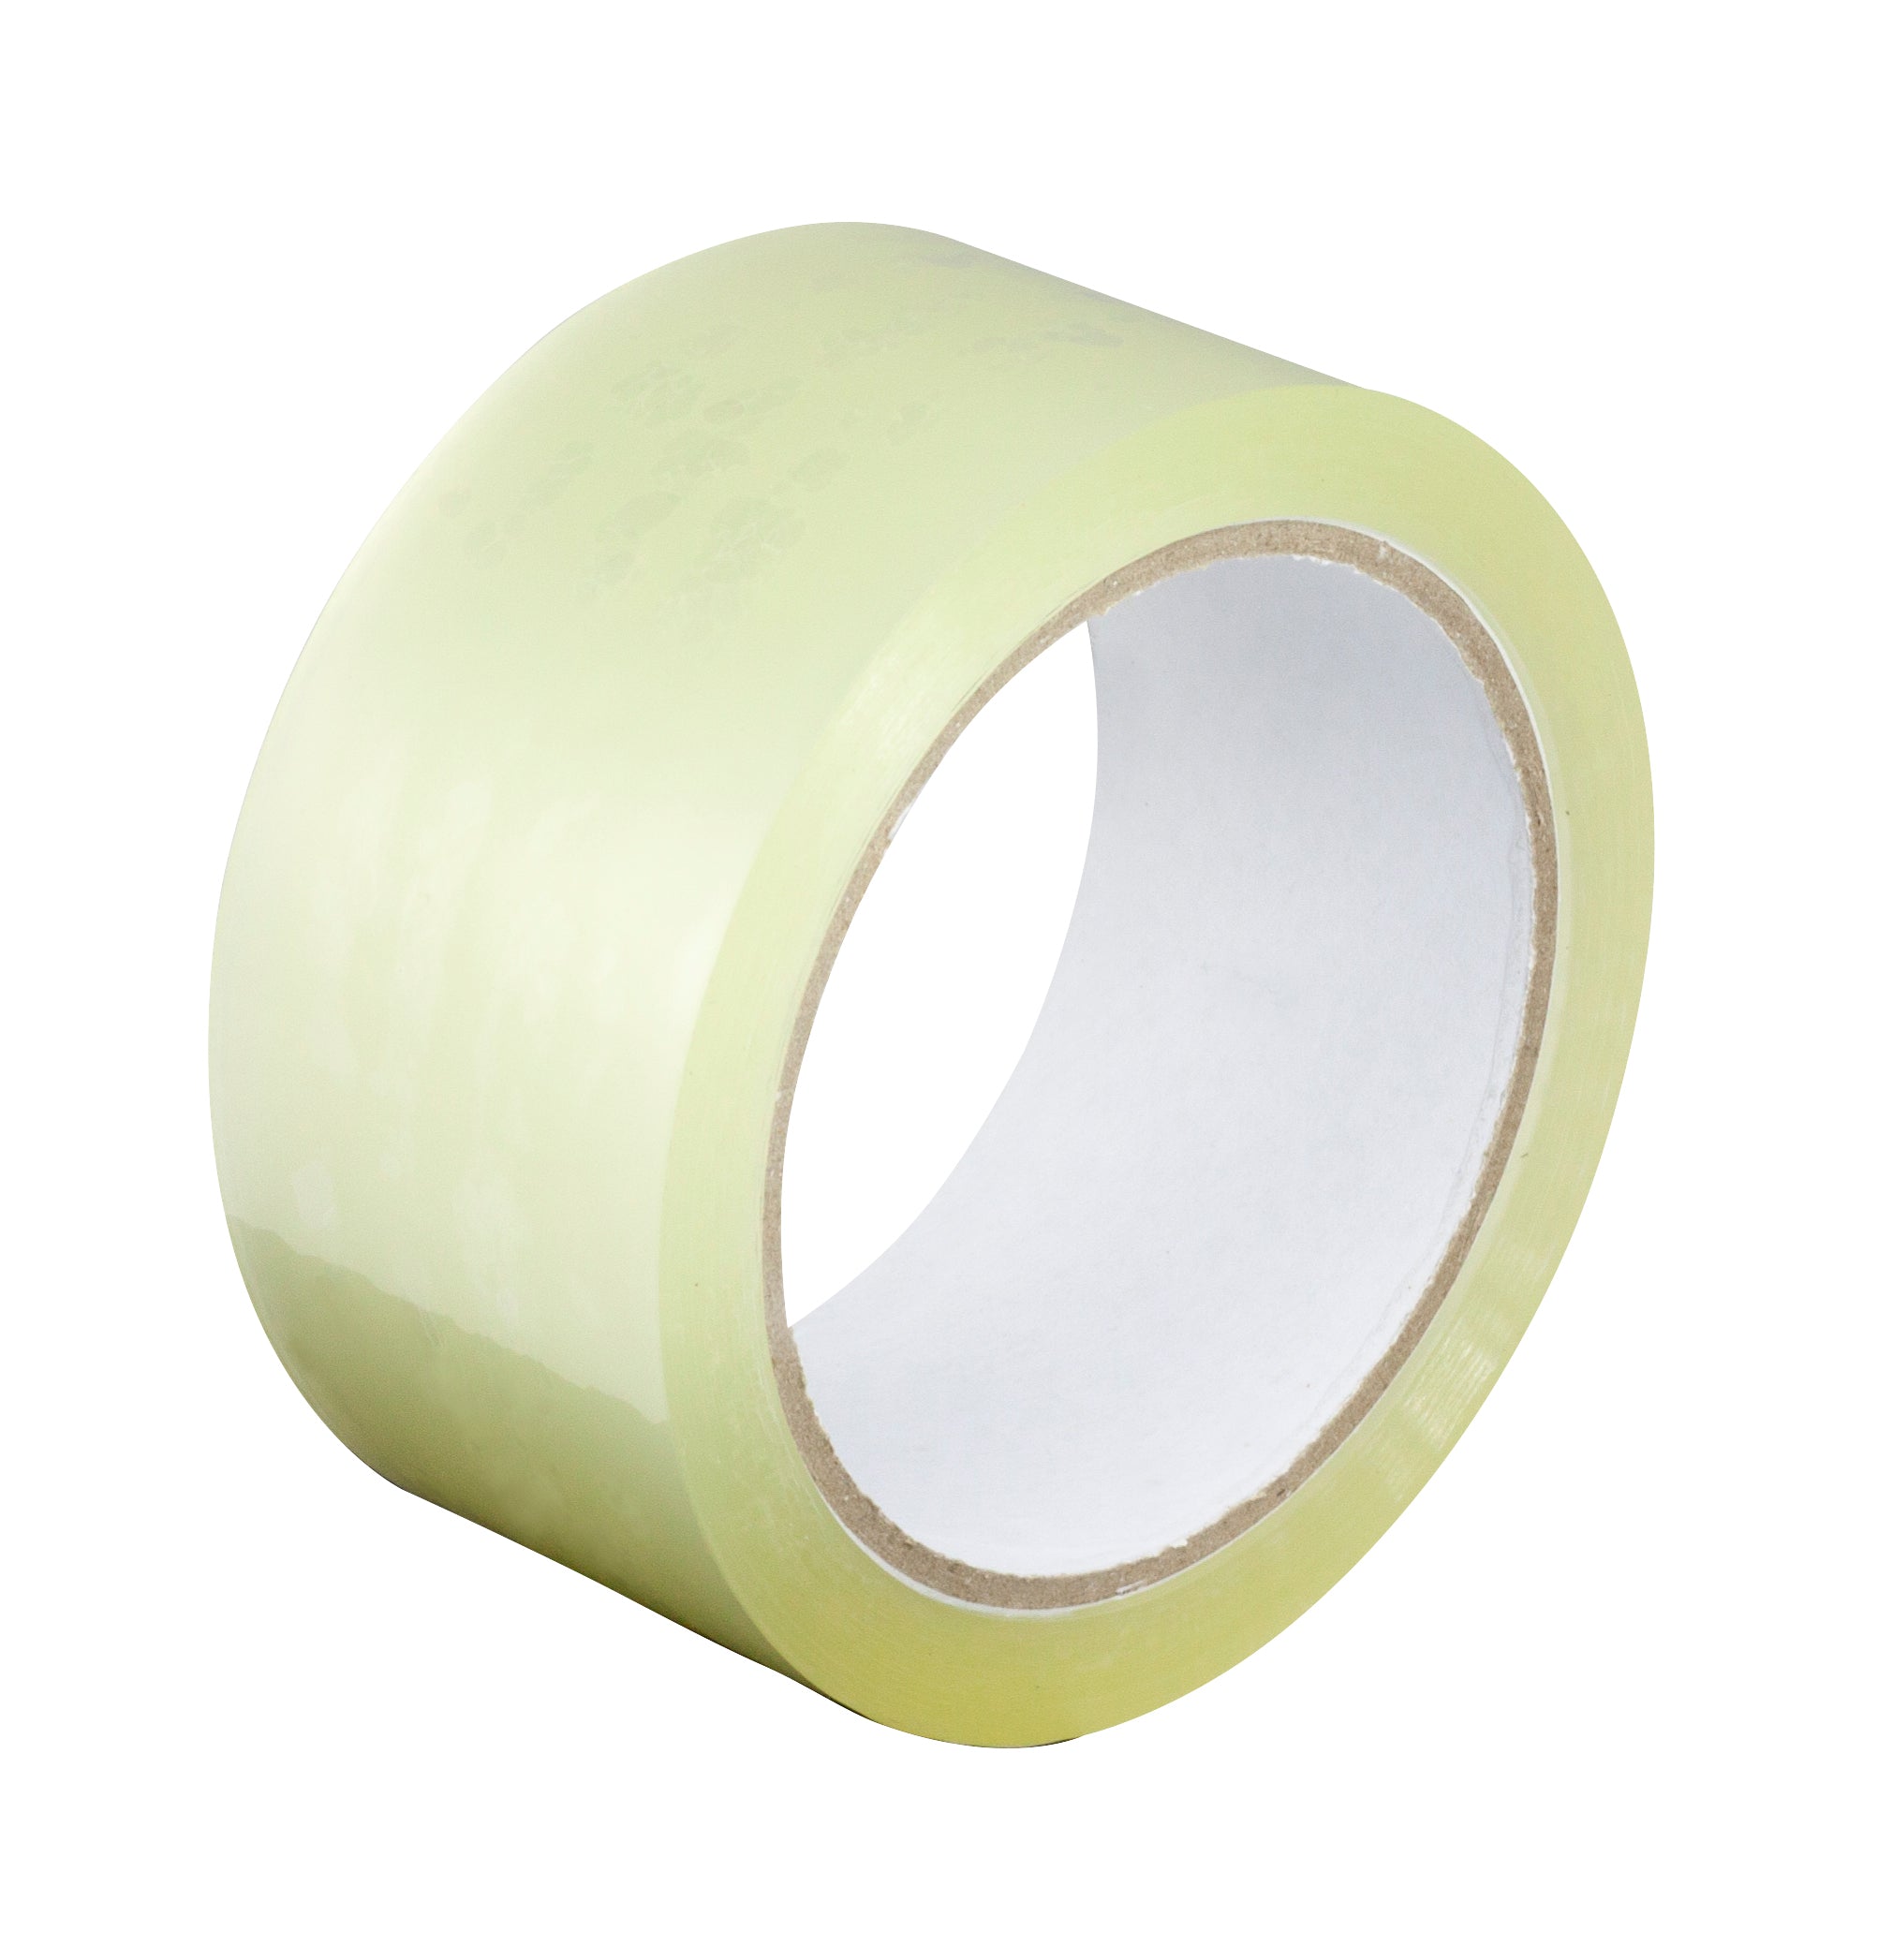 Parcel Tape 48mm x 66m (CLEAR) 40 Micron Thickness - Pack of 6